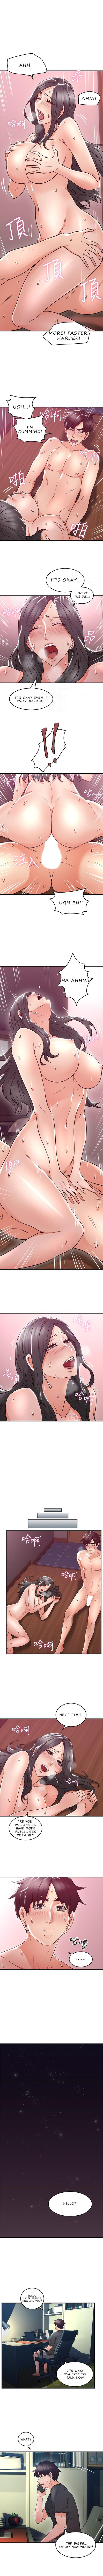 Defloration 나를 달래 줘 | SOOTHE ME Ch. 13 Hot Girls Getting Fucked - Page 7